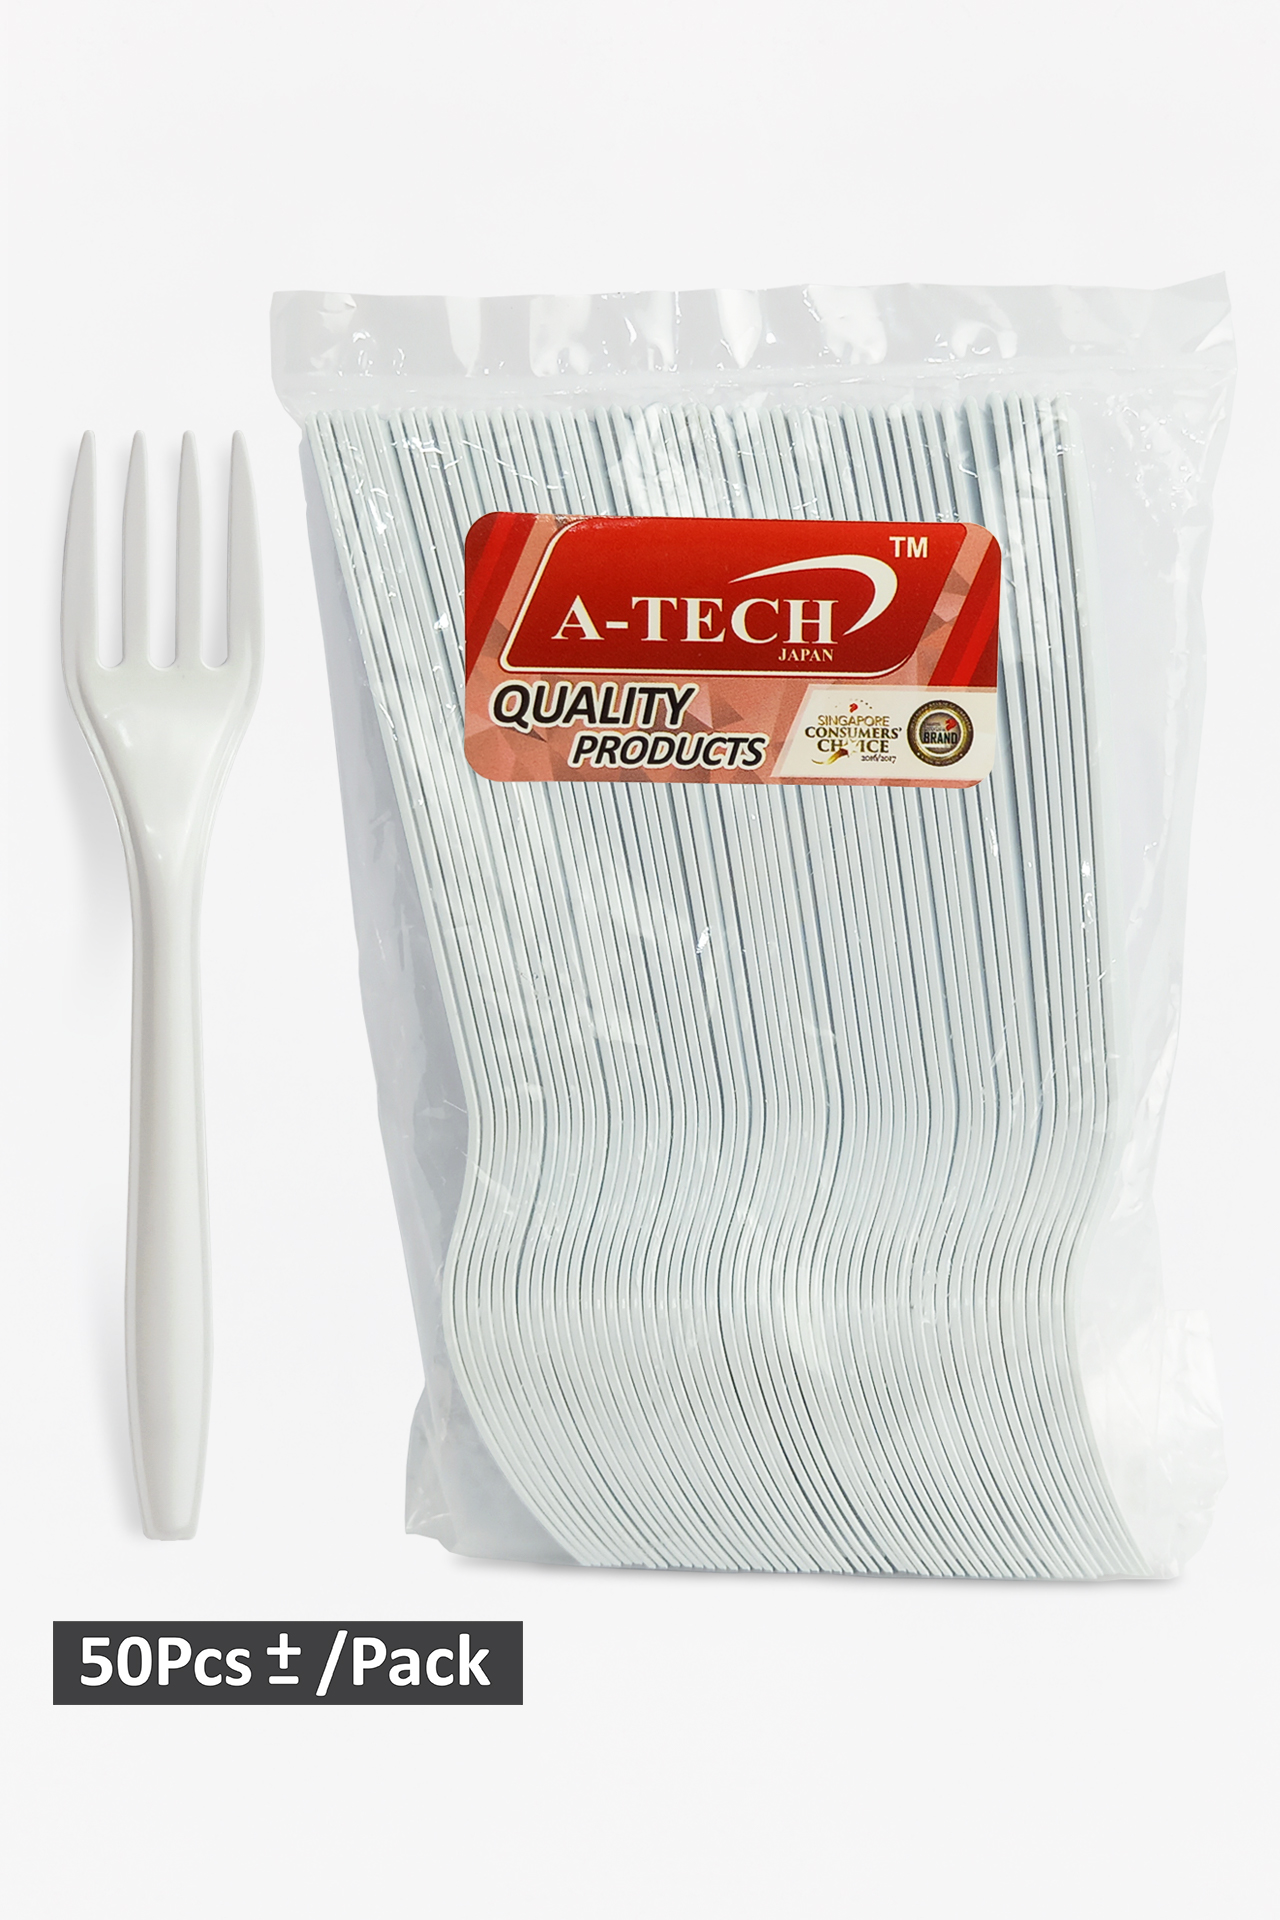 DISPOSABLE PLASTIC FORK (5 INCH) - A-Tech